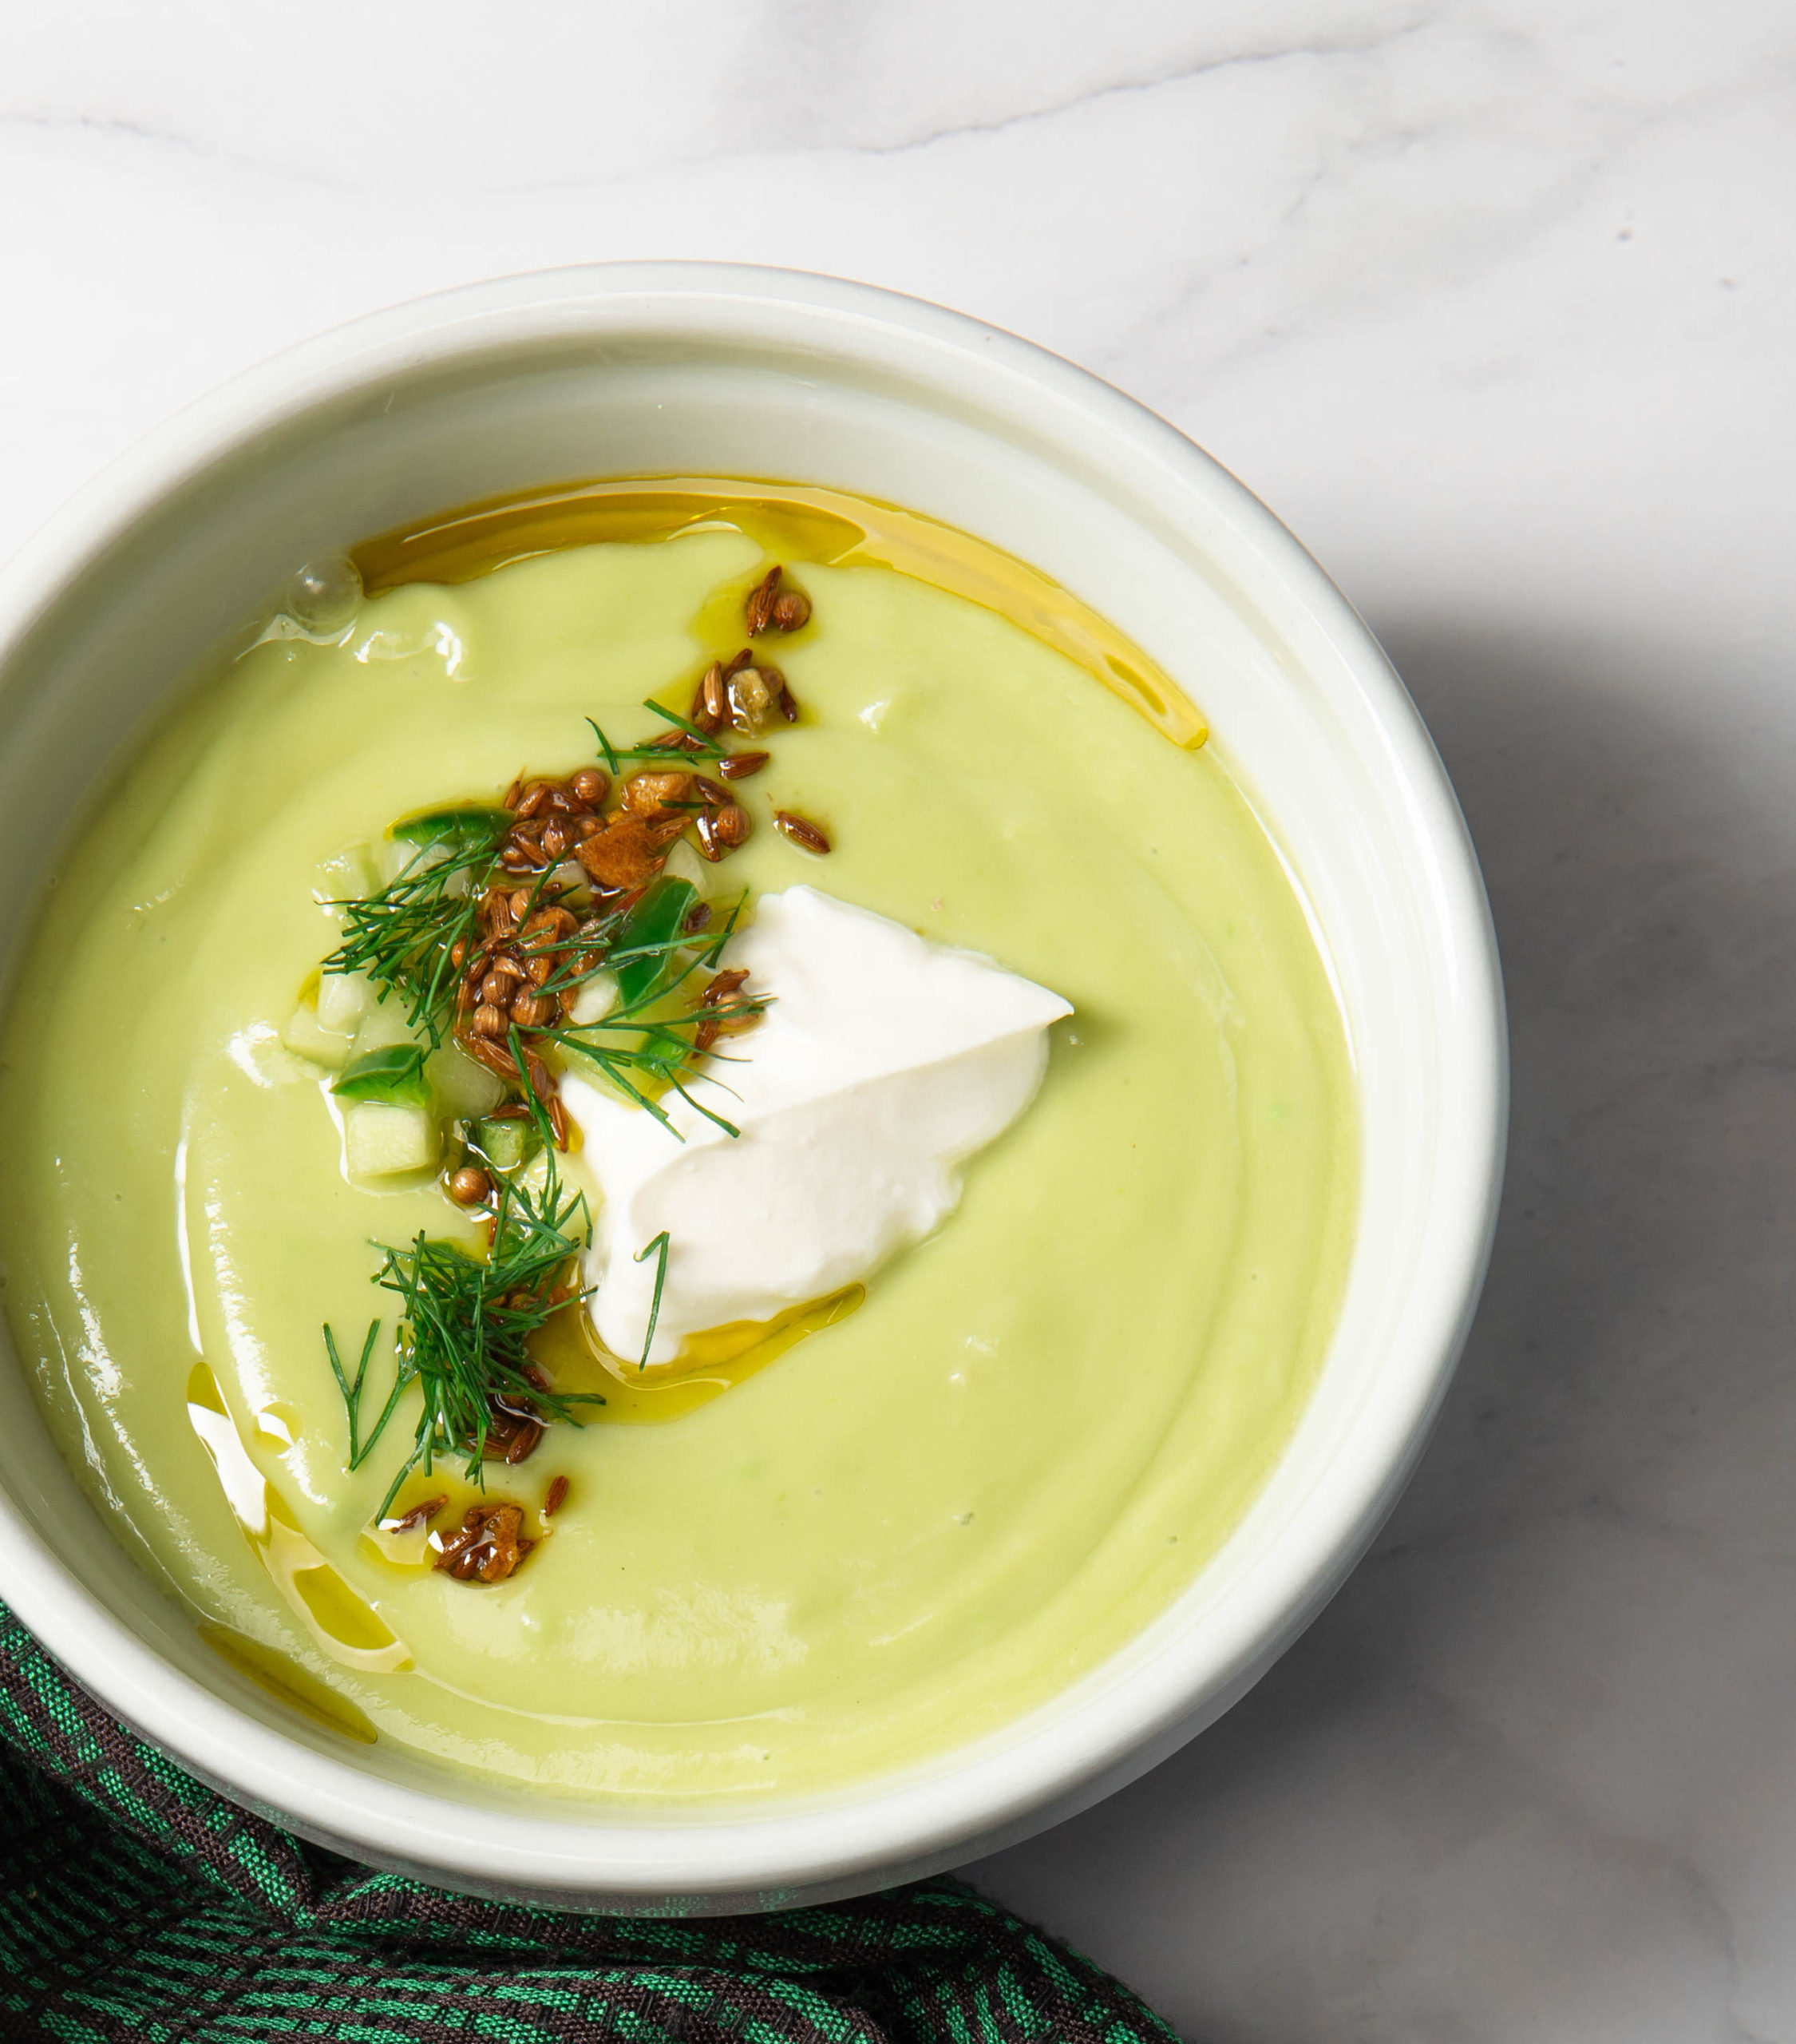 Breaking Up With Instacart and Chilled Avocado Soup With Crispy Garlic Oil